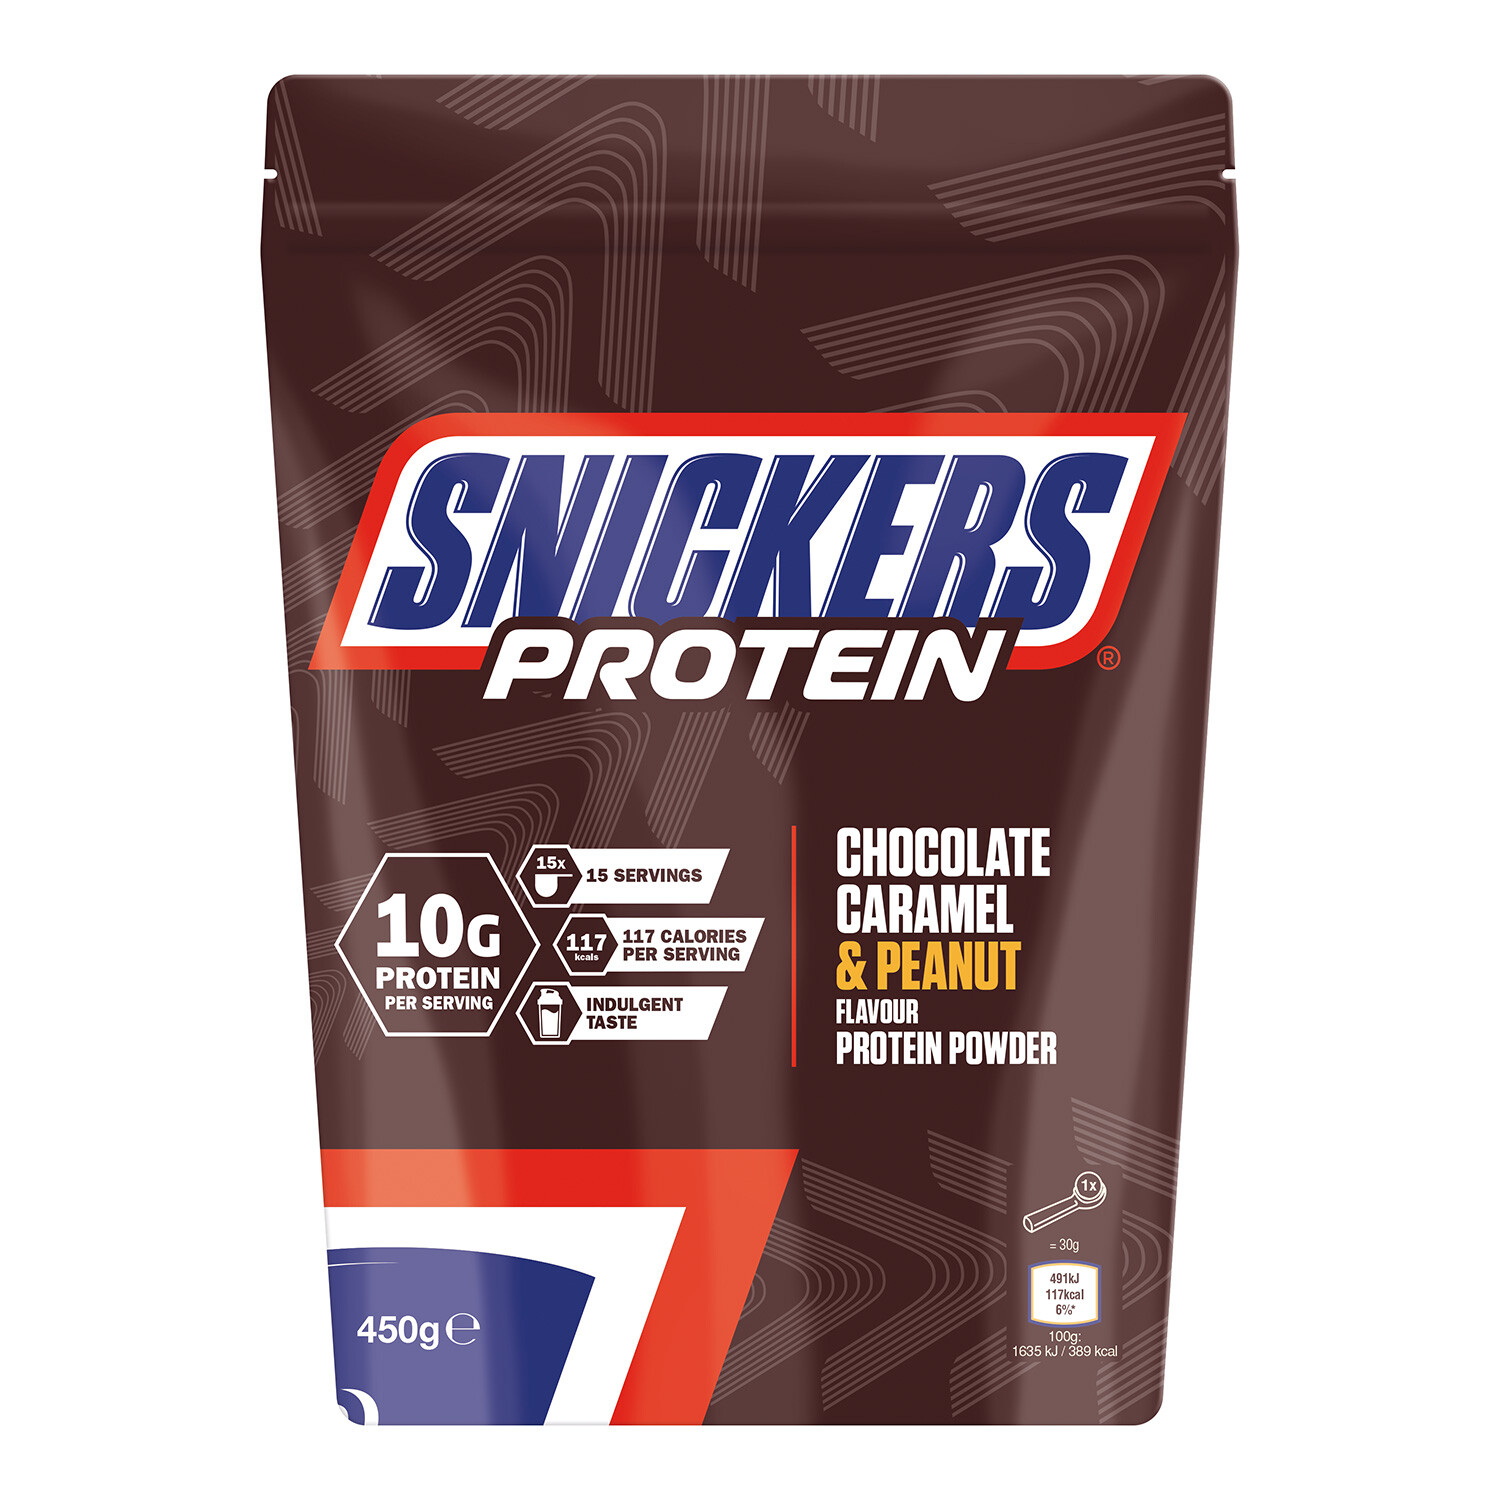 Snickers Protein Powder Pouch - Brown Image